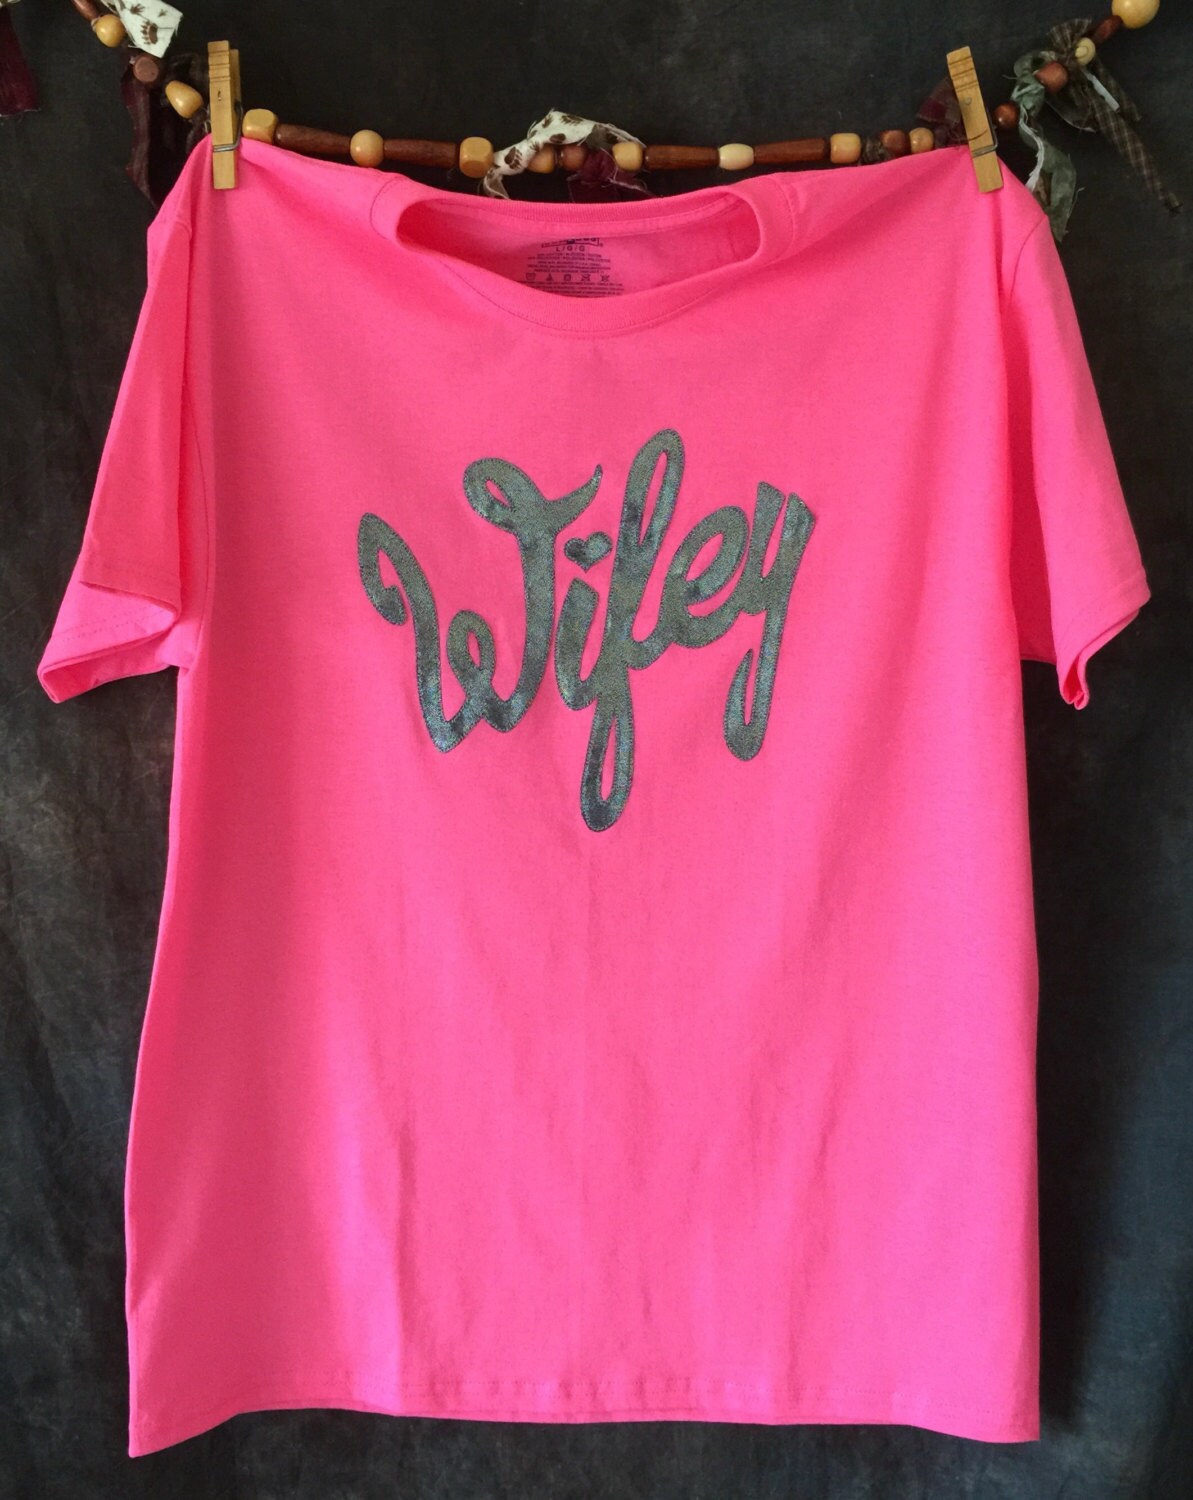 Wifey Shirt. Lots of Colors to Choose From